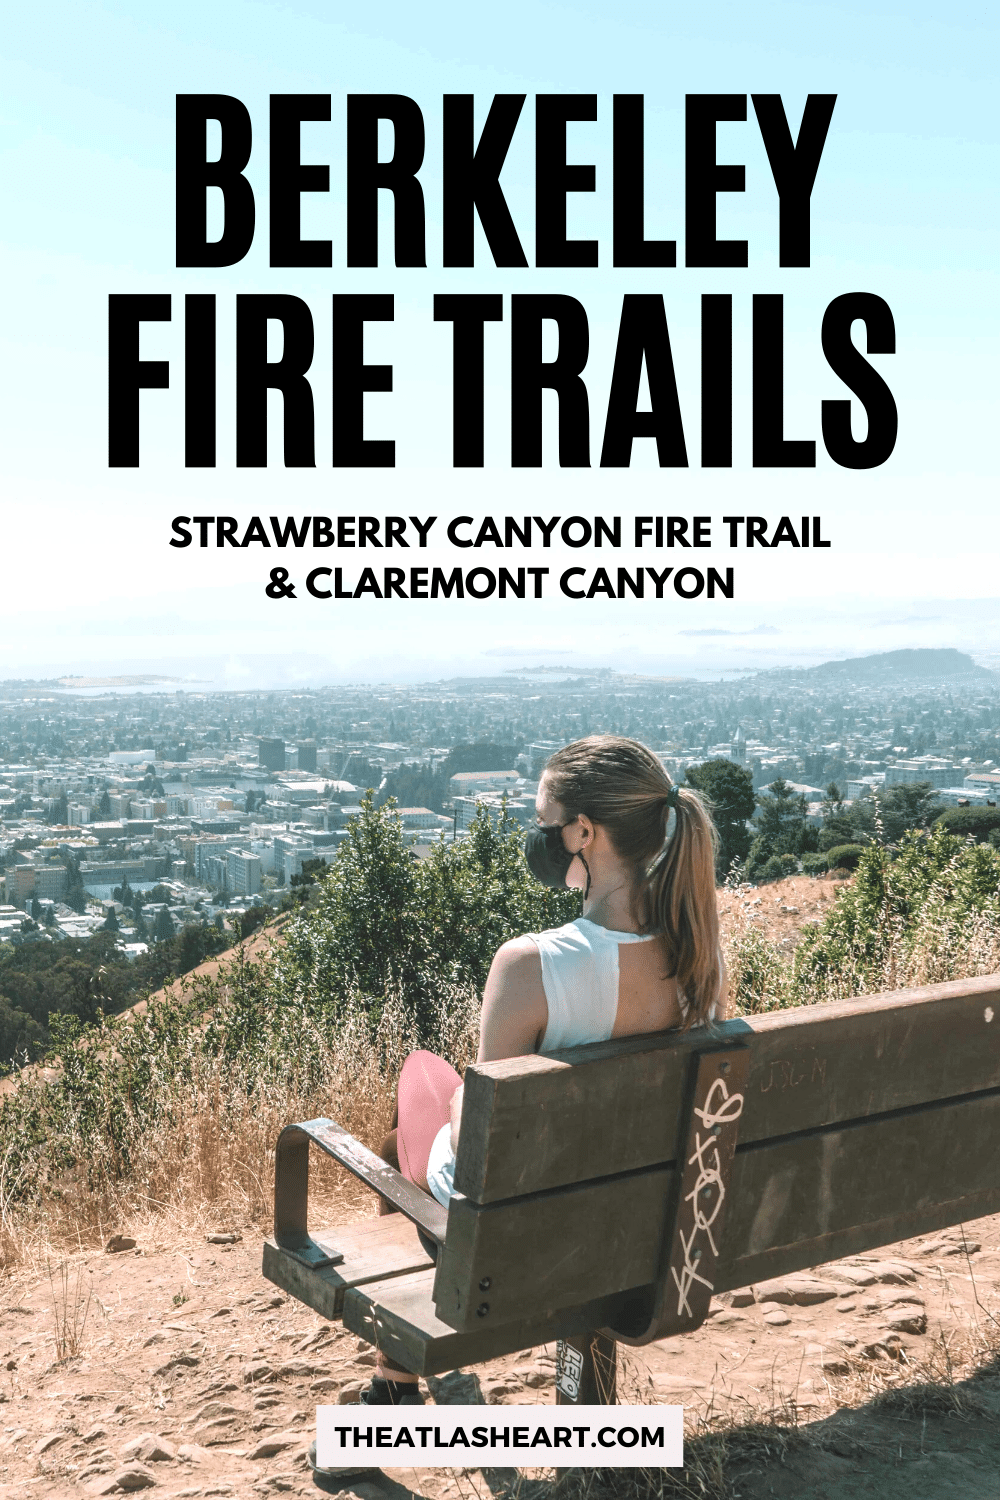 Berkeley Fire Trails: Strawberry Canyon Fire Trail & Claremont Canyon